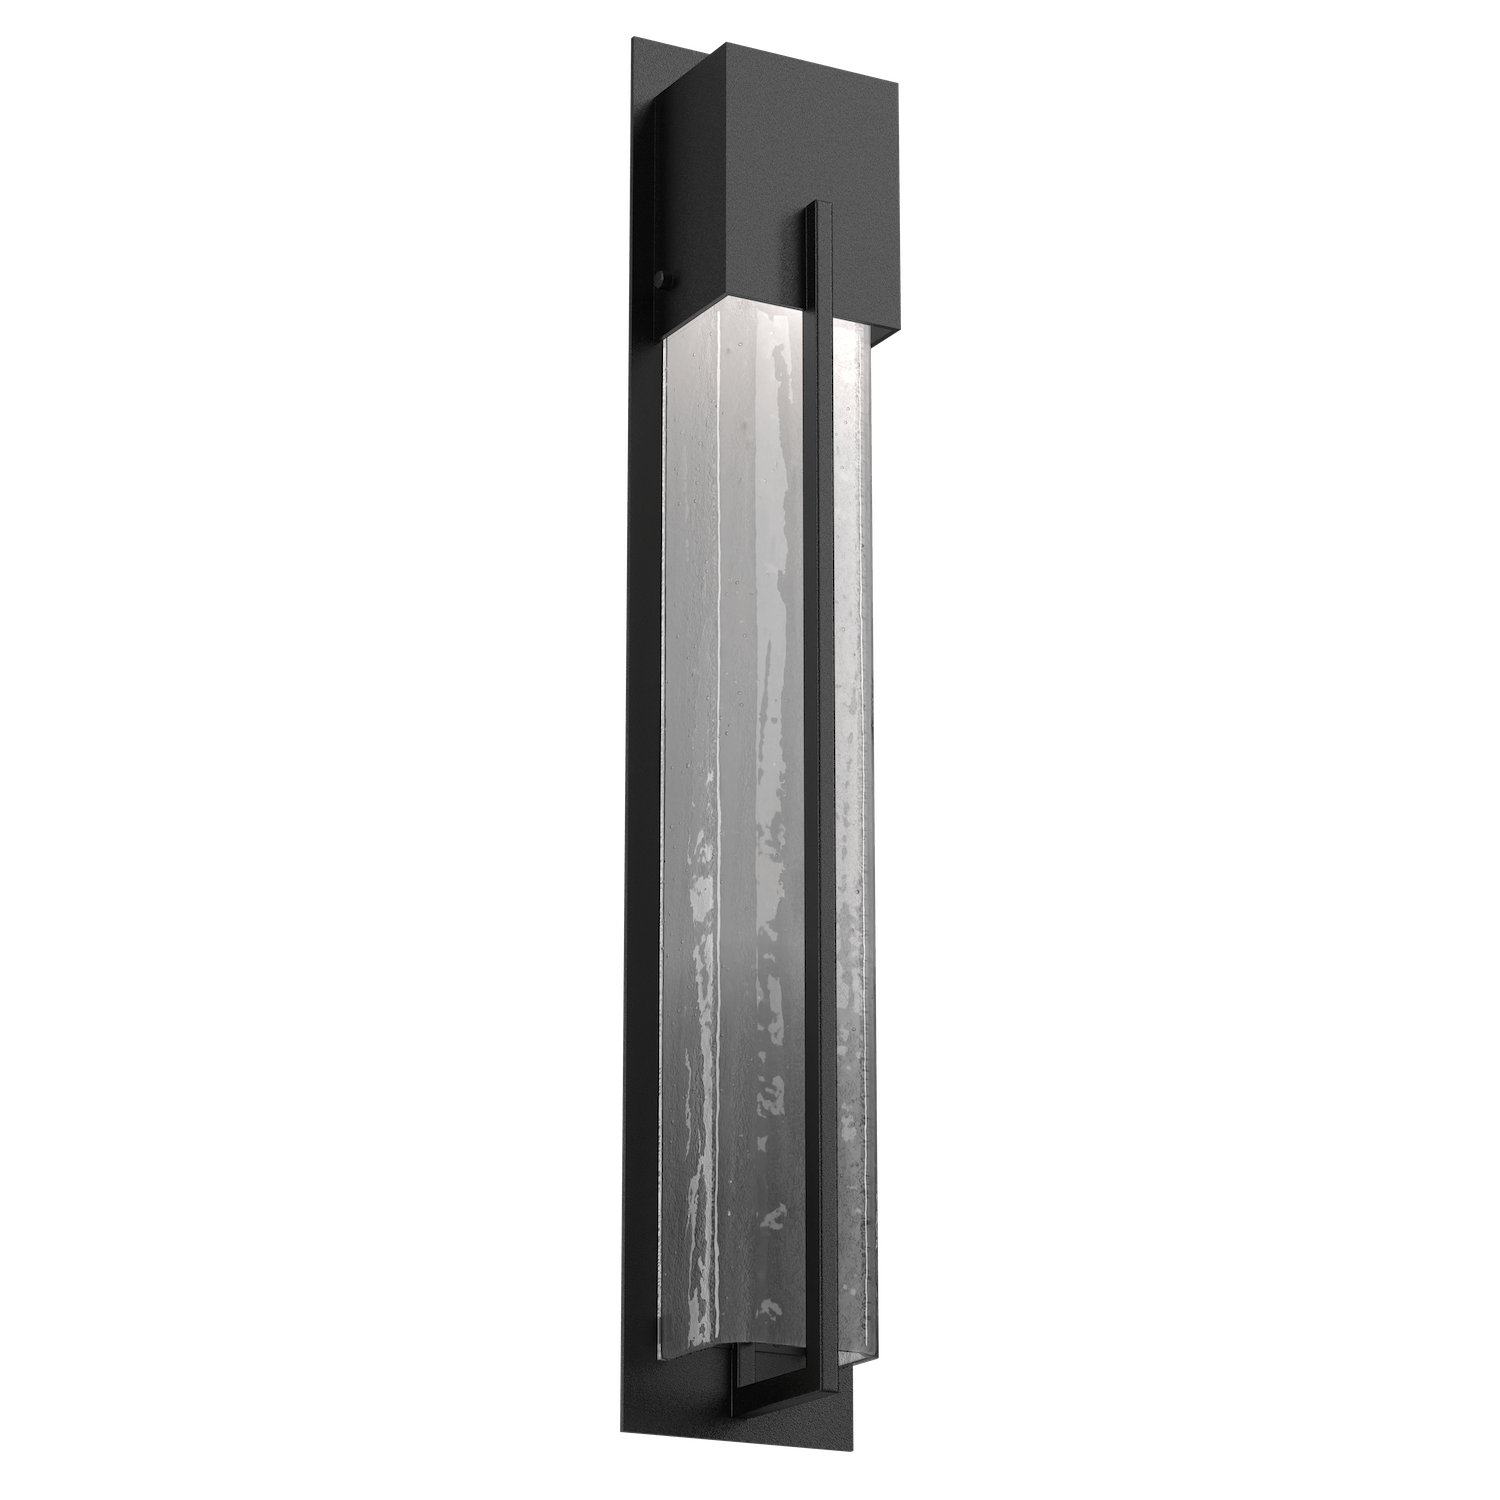 Hammerton Studio Square Outdoor Cover LED Sconce Outdoor l Wall Hammerton Studio 29 Textured Black (Outdoor) Frosted Granite